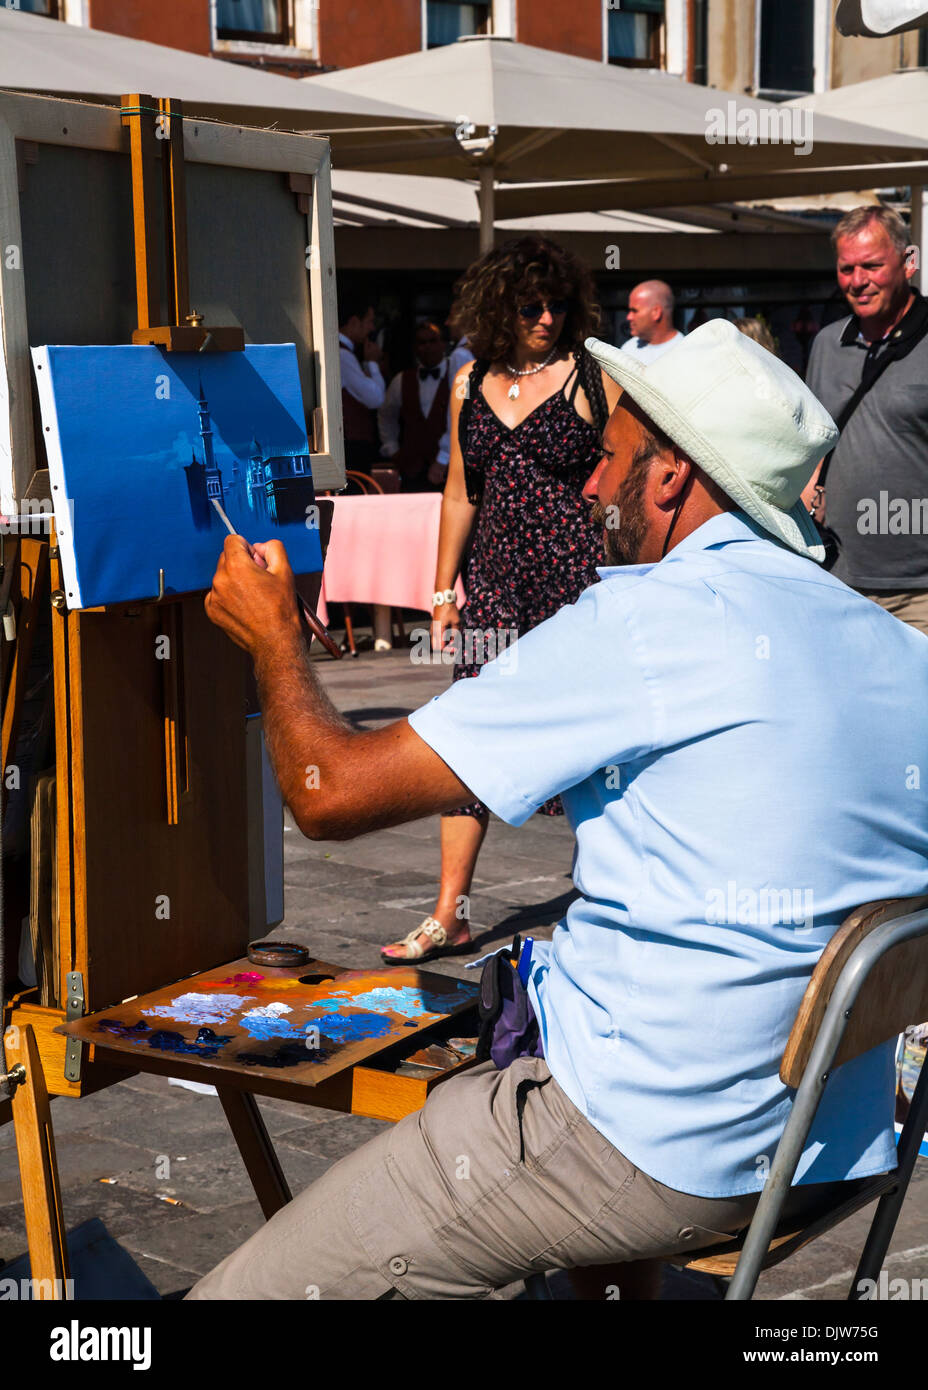 An artist at work on the streets of Venice painting a scene on canvas, Venice, Veneto, Italy. Stock Photo